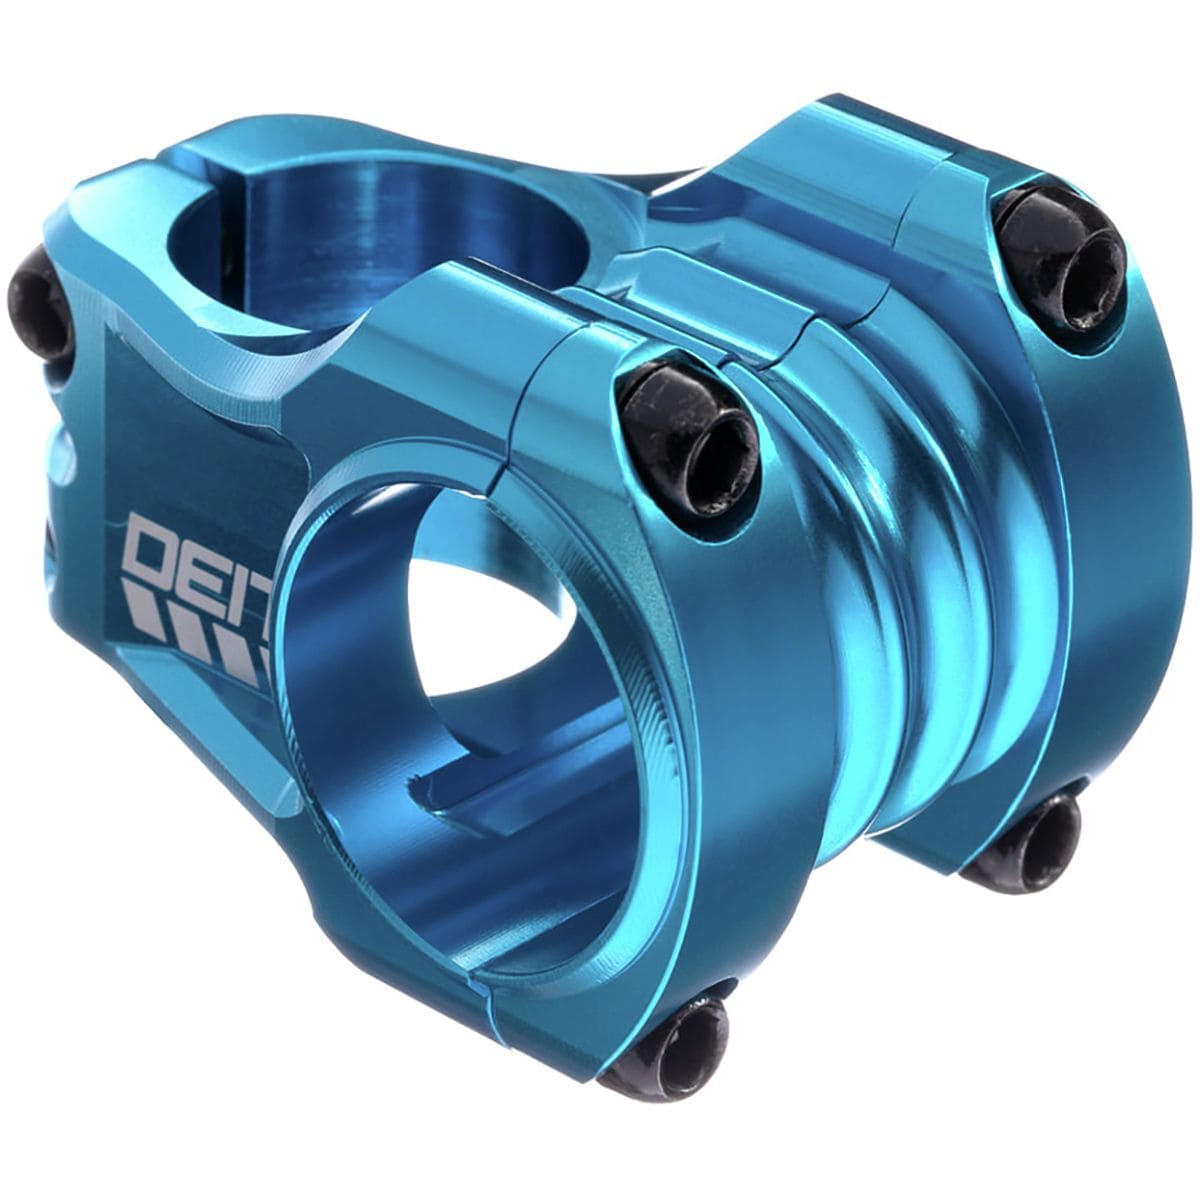 Deity Components Copperhead 35mm Stem Blue, 35mm